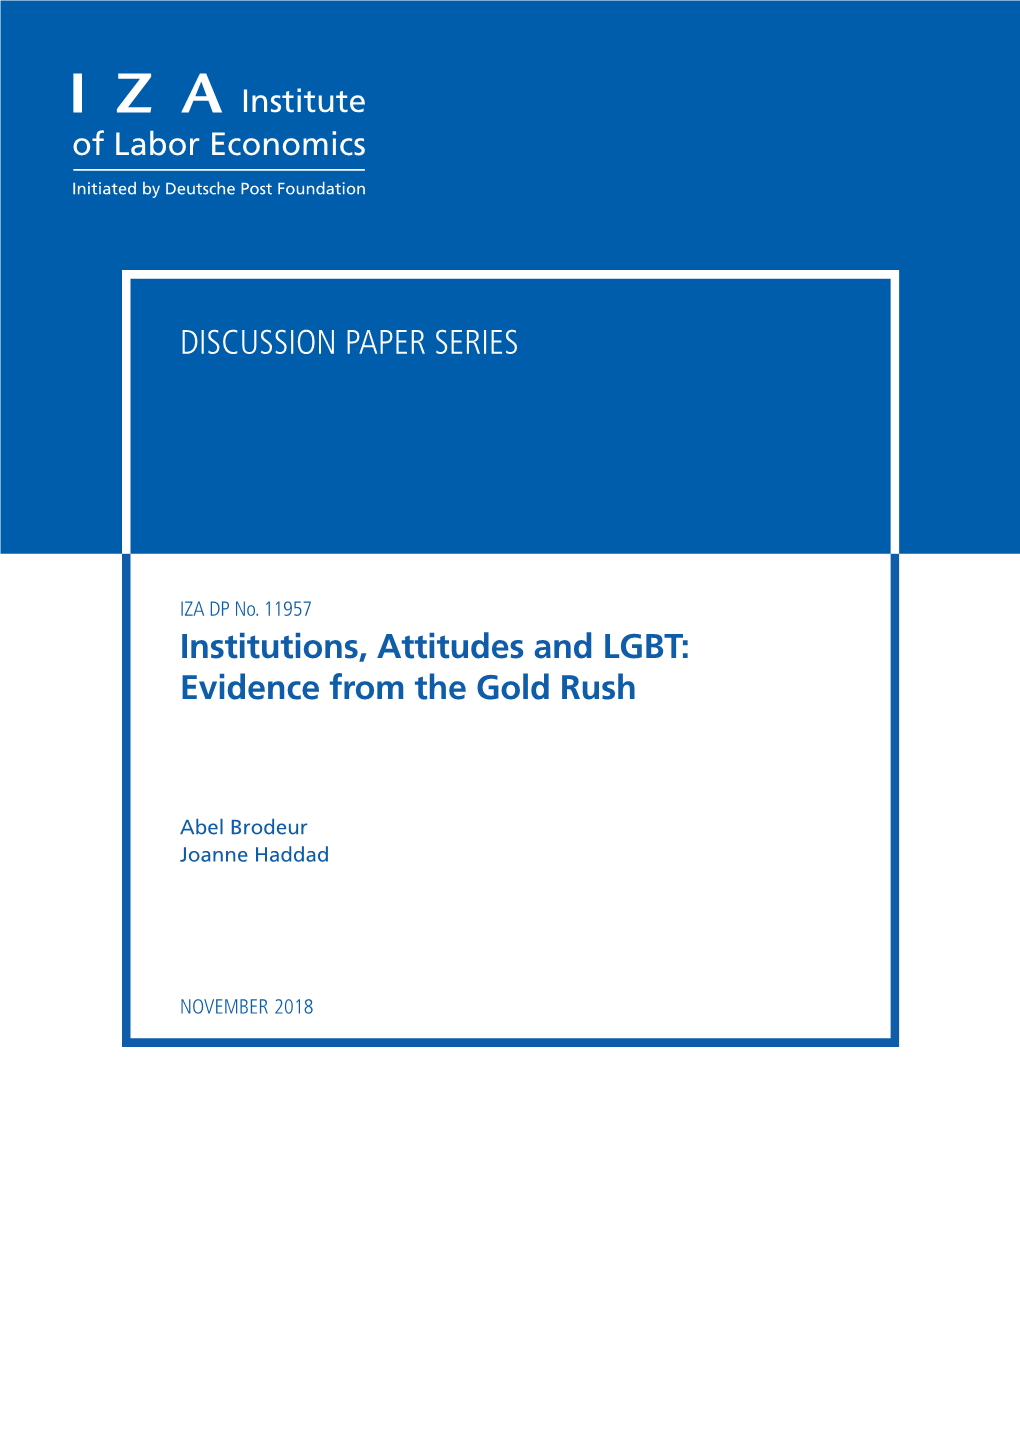 Institutions, Attitudes and LGBT: Evidence from the Gold Rush